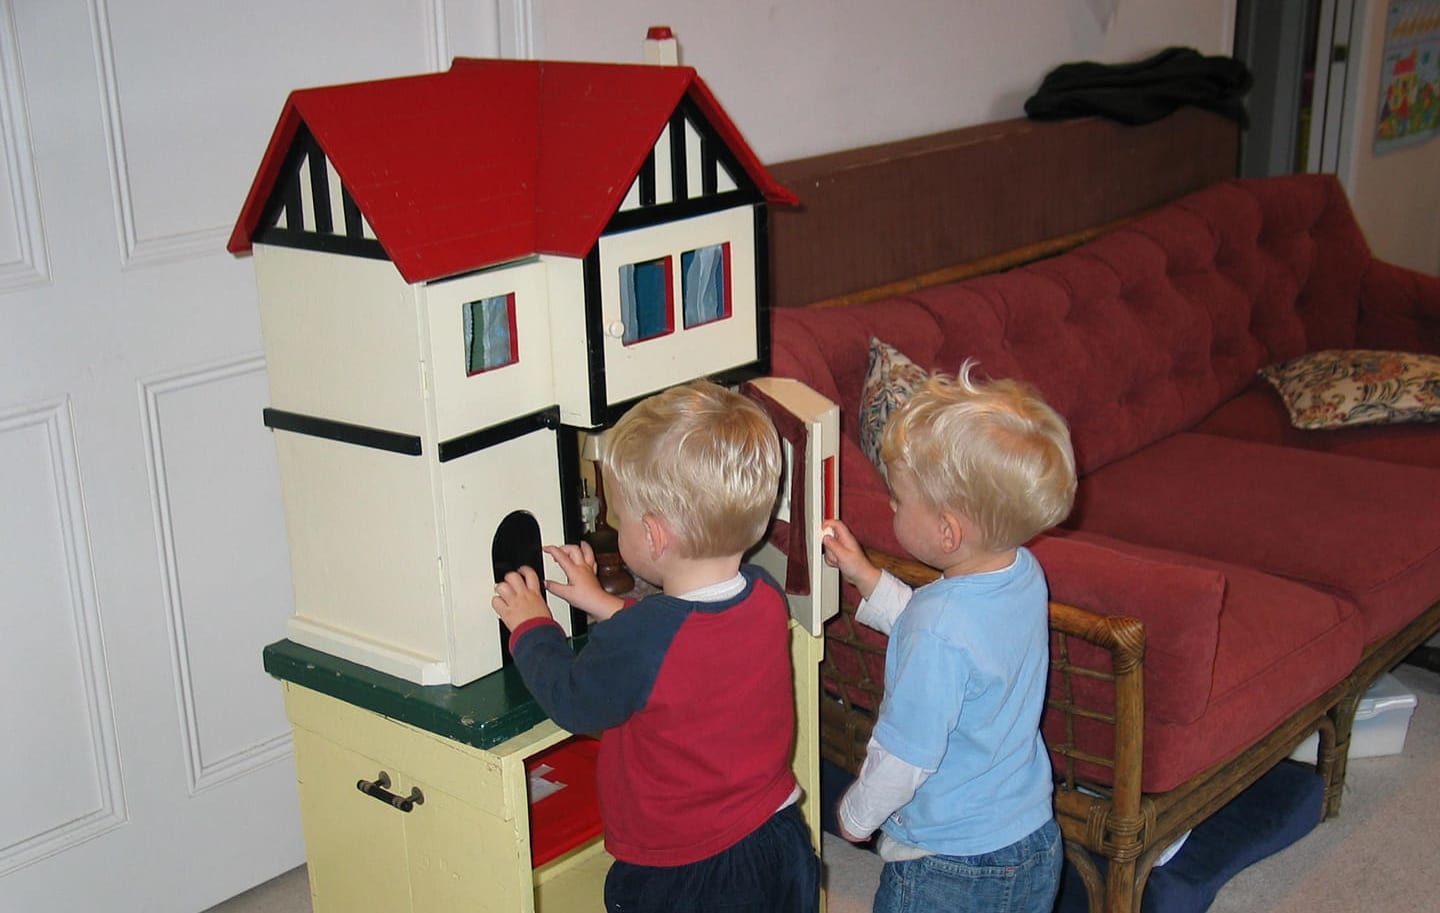 An RAF trainee pilot enlisted the help of other trainees to make the doll's house in secret. He wanted his baby daughter to have something to remember him by should he not return from the war